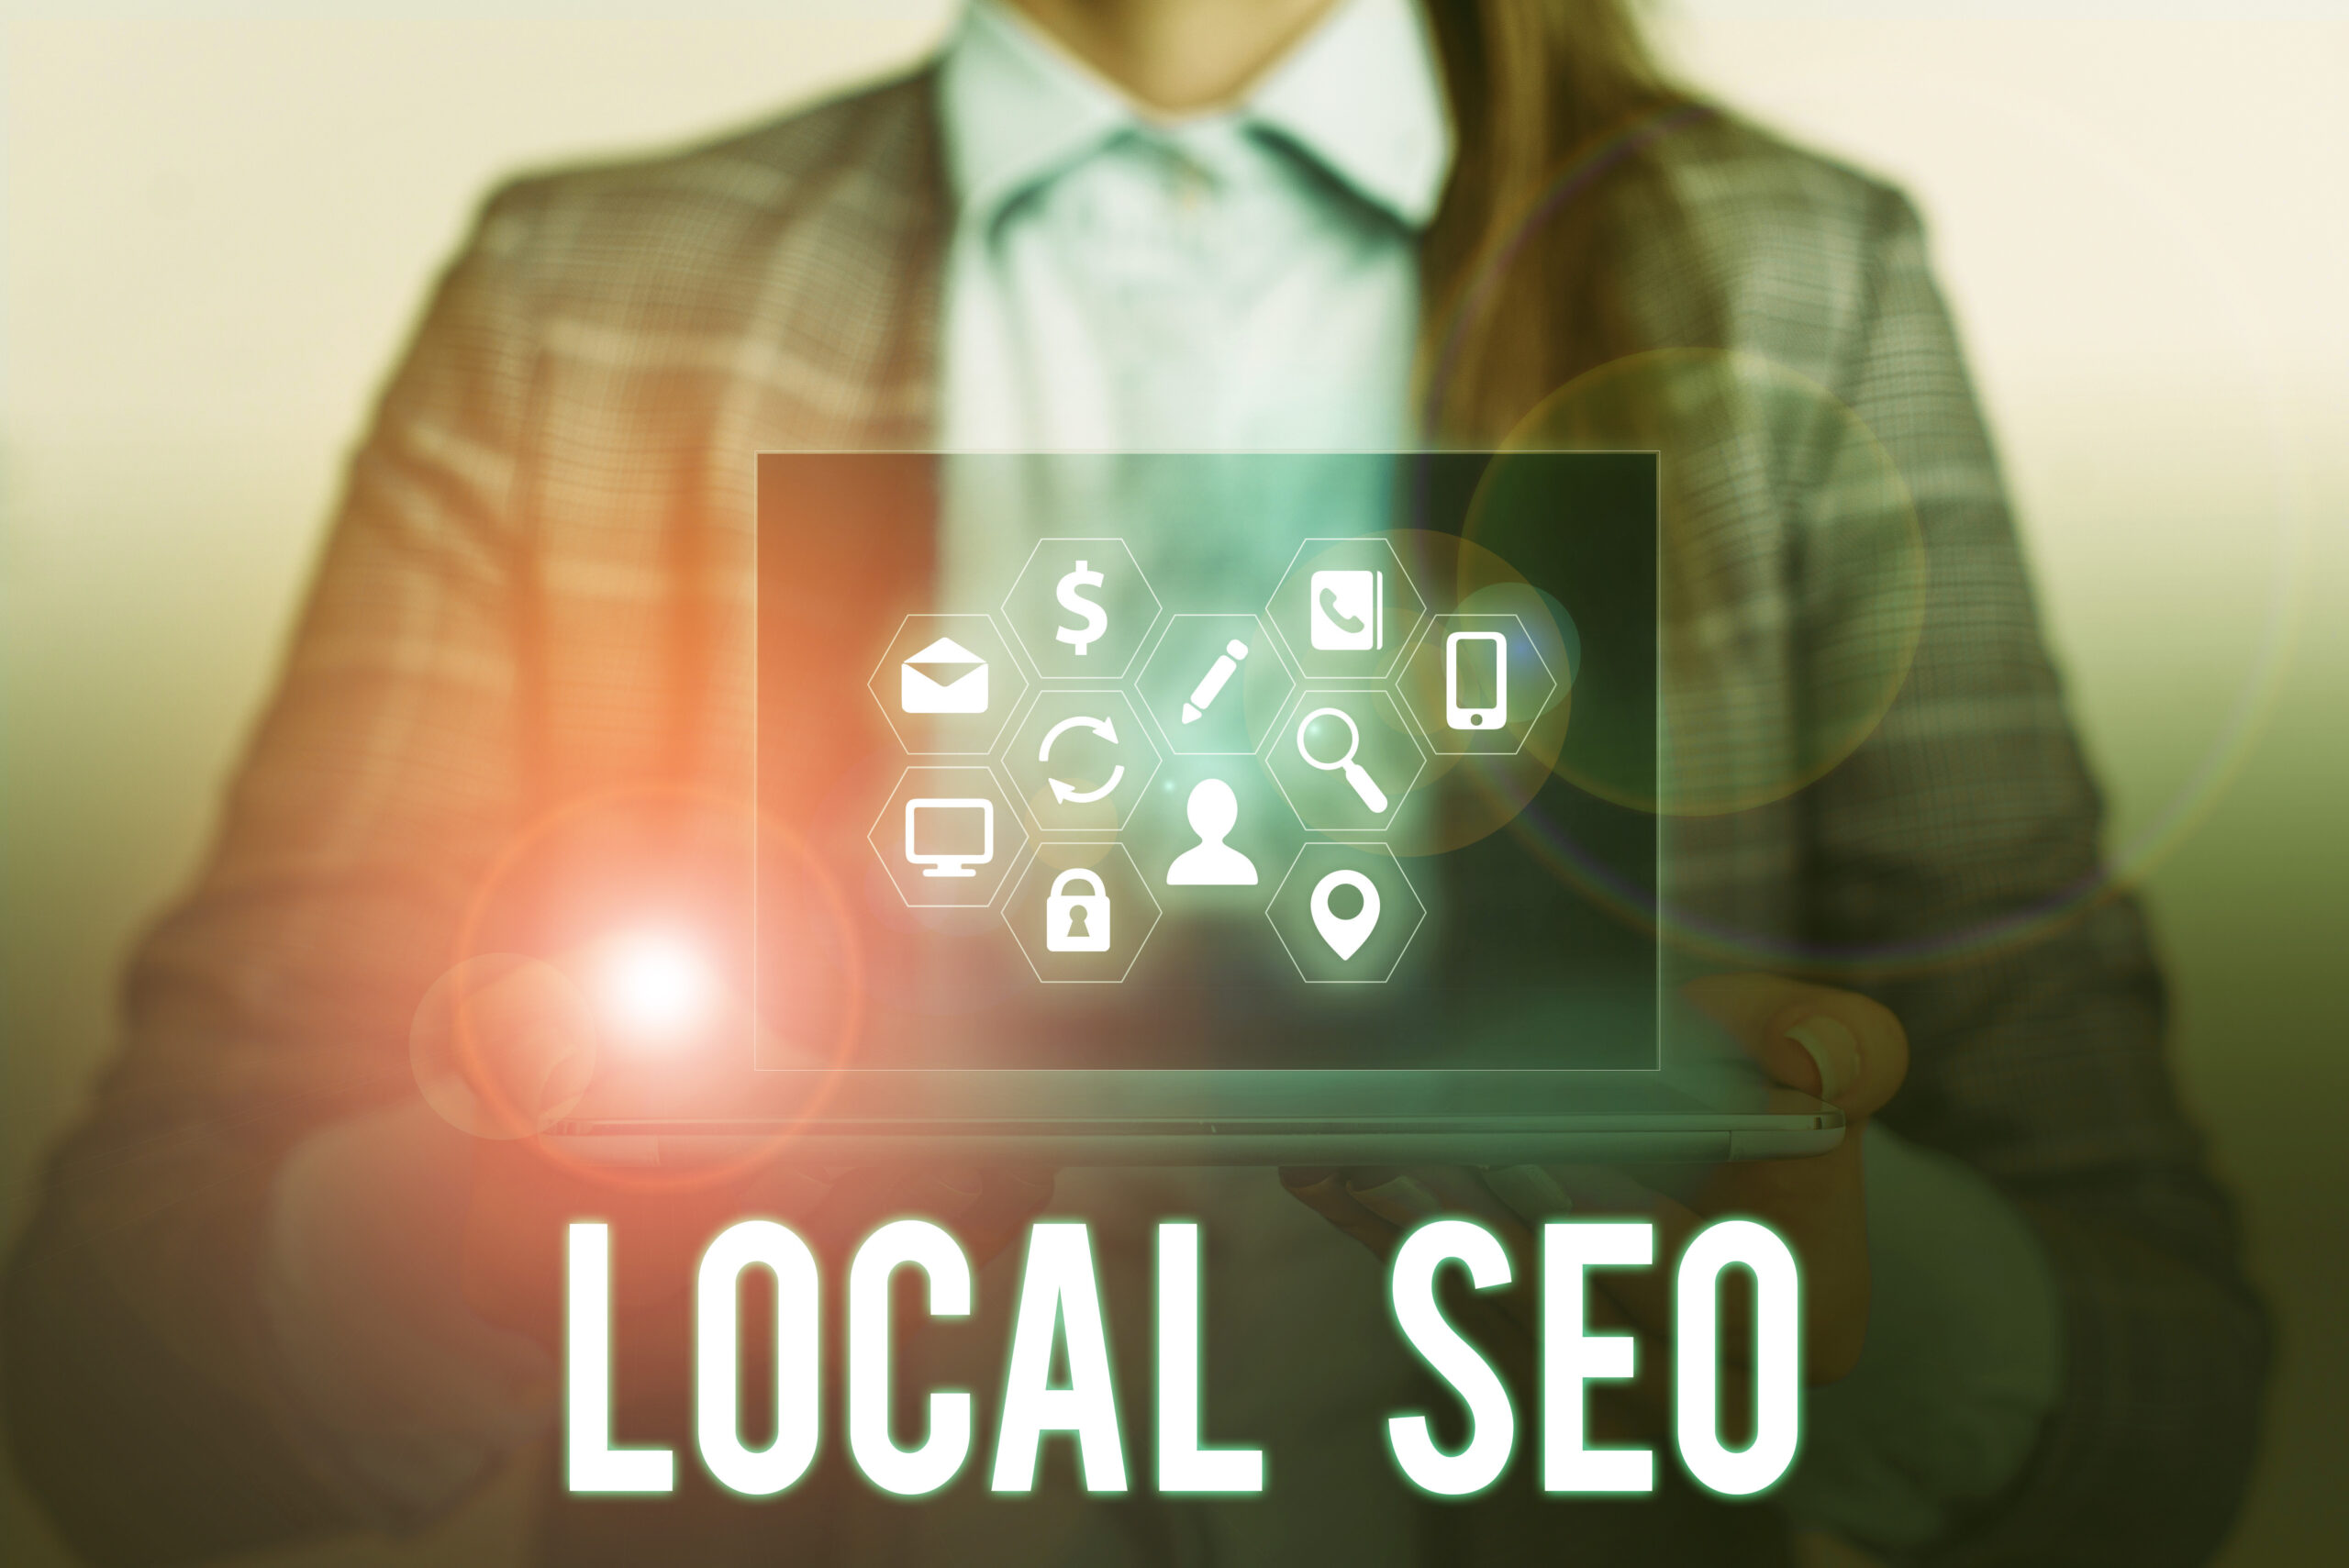 What is Local SEO and How Does It Differ from Regular SEO